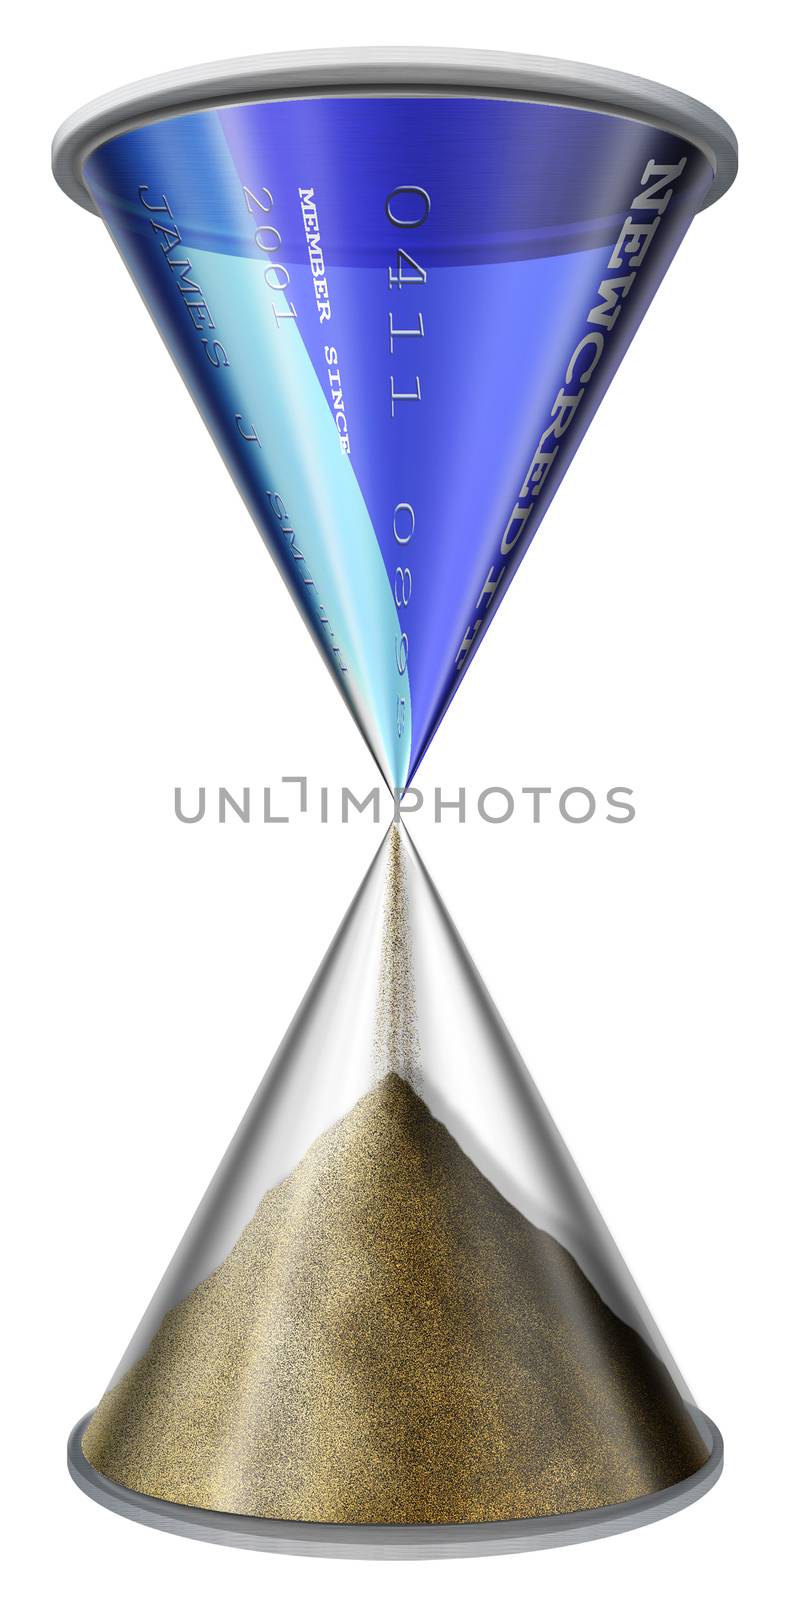 Hourglass symbolizes concept time is money